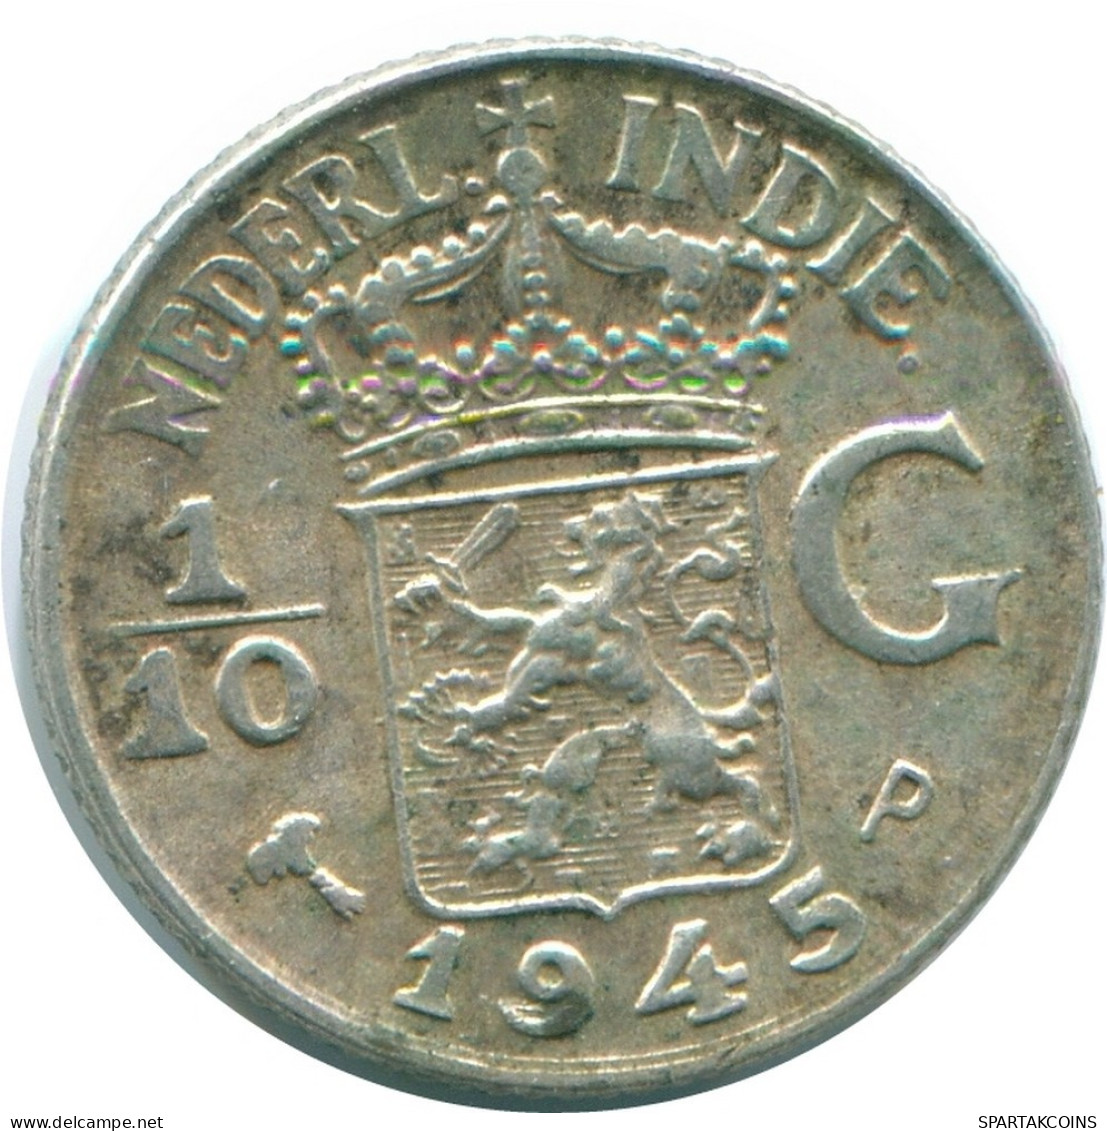 1/10 GULDEN 1945 P NETHERLANDS EAST INDIES SILVER Colonial Coin #NL14132.3.U.A - Dutch East Indies